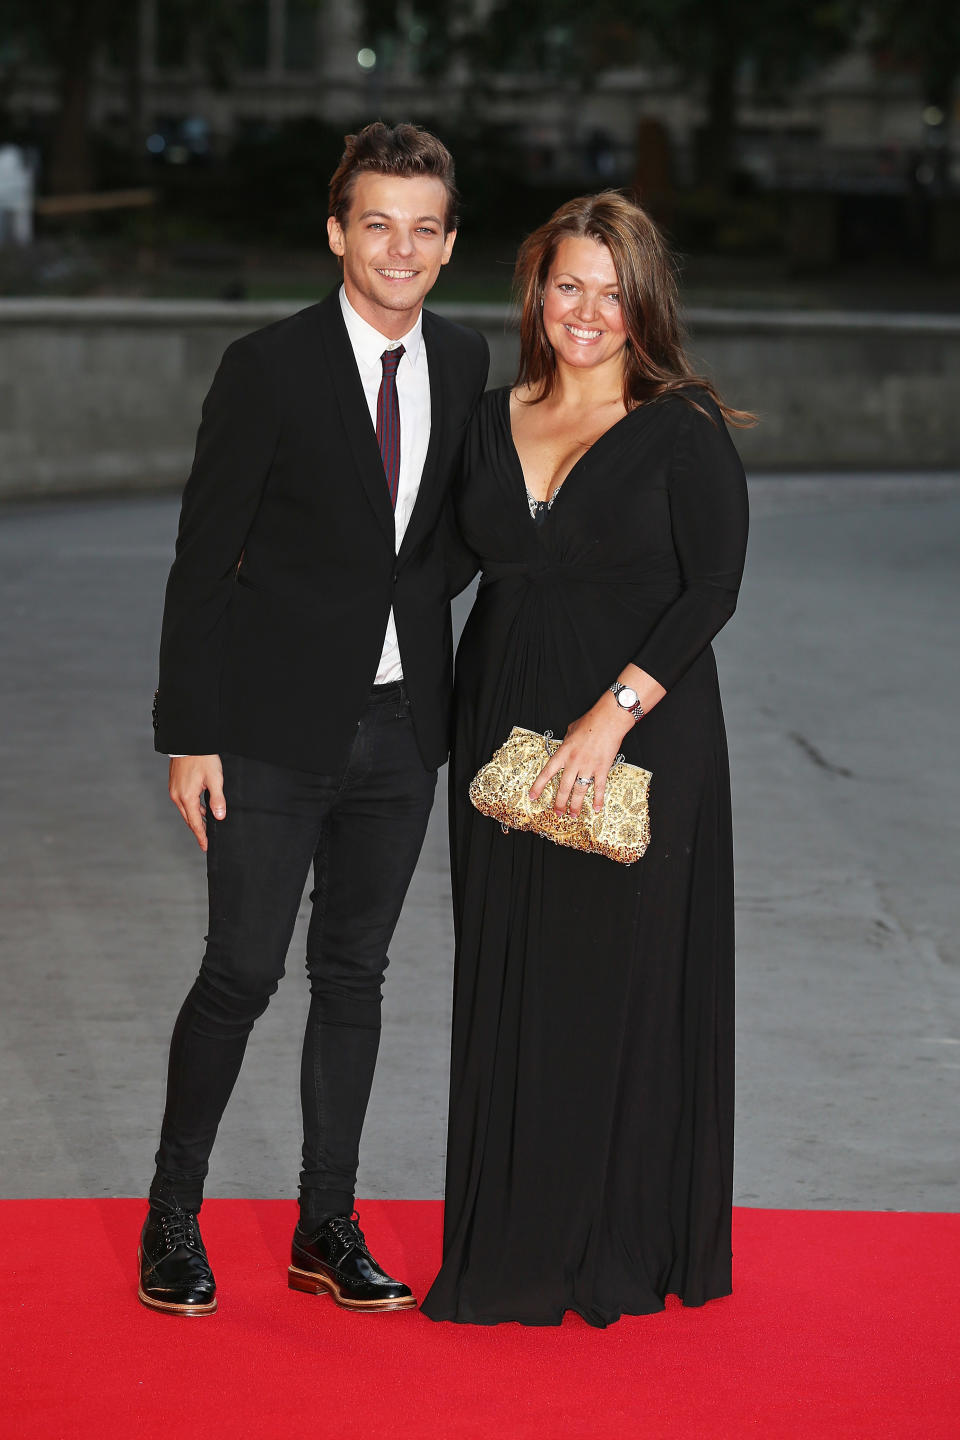 He lost his mother <span>Johannah in 2016 after she lost her battle with leukaemia at age 43. </span>Photo: Getty